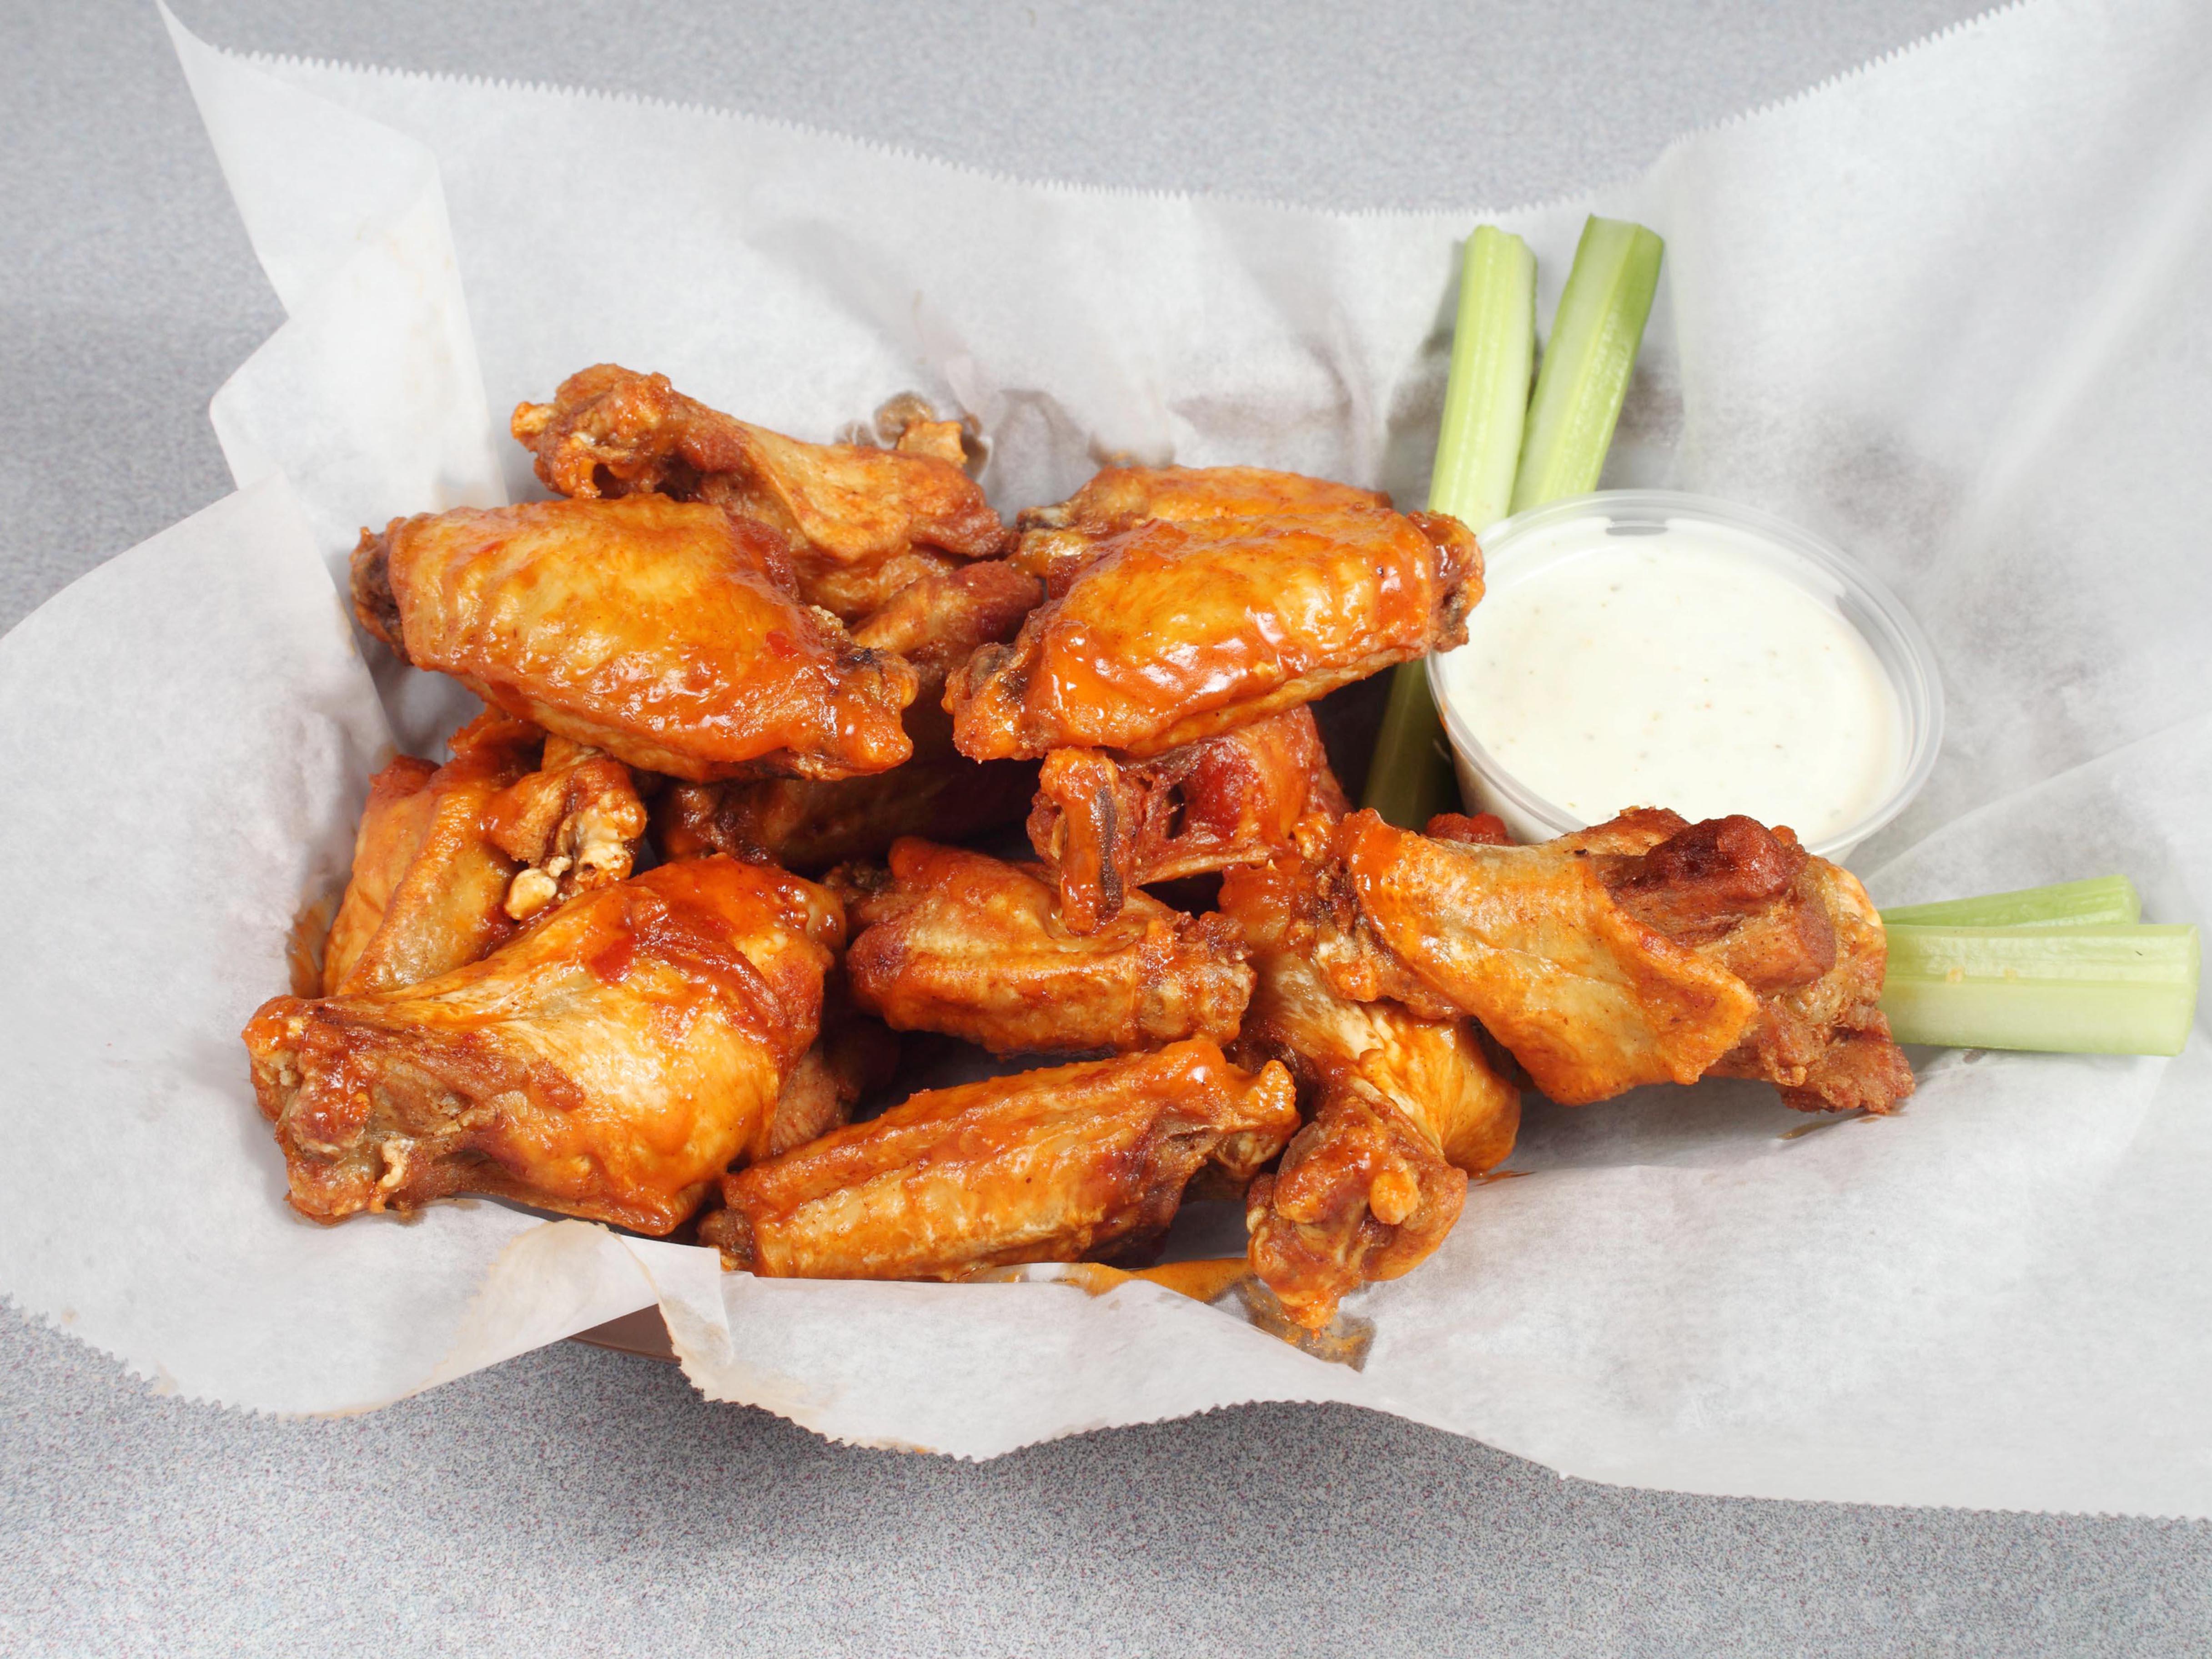 Chicken wings with dressing, celery and your choice of buffalo sauce